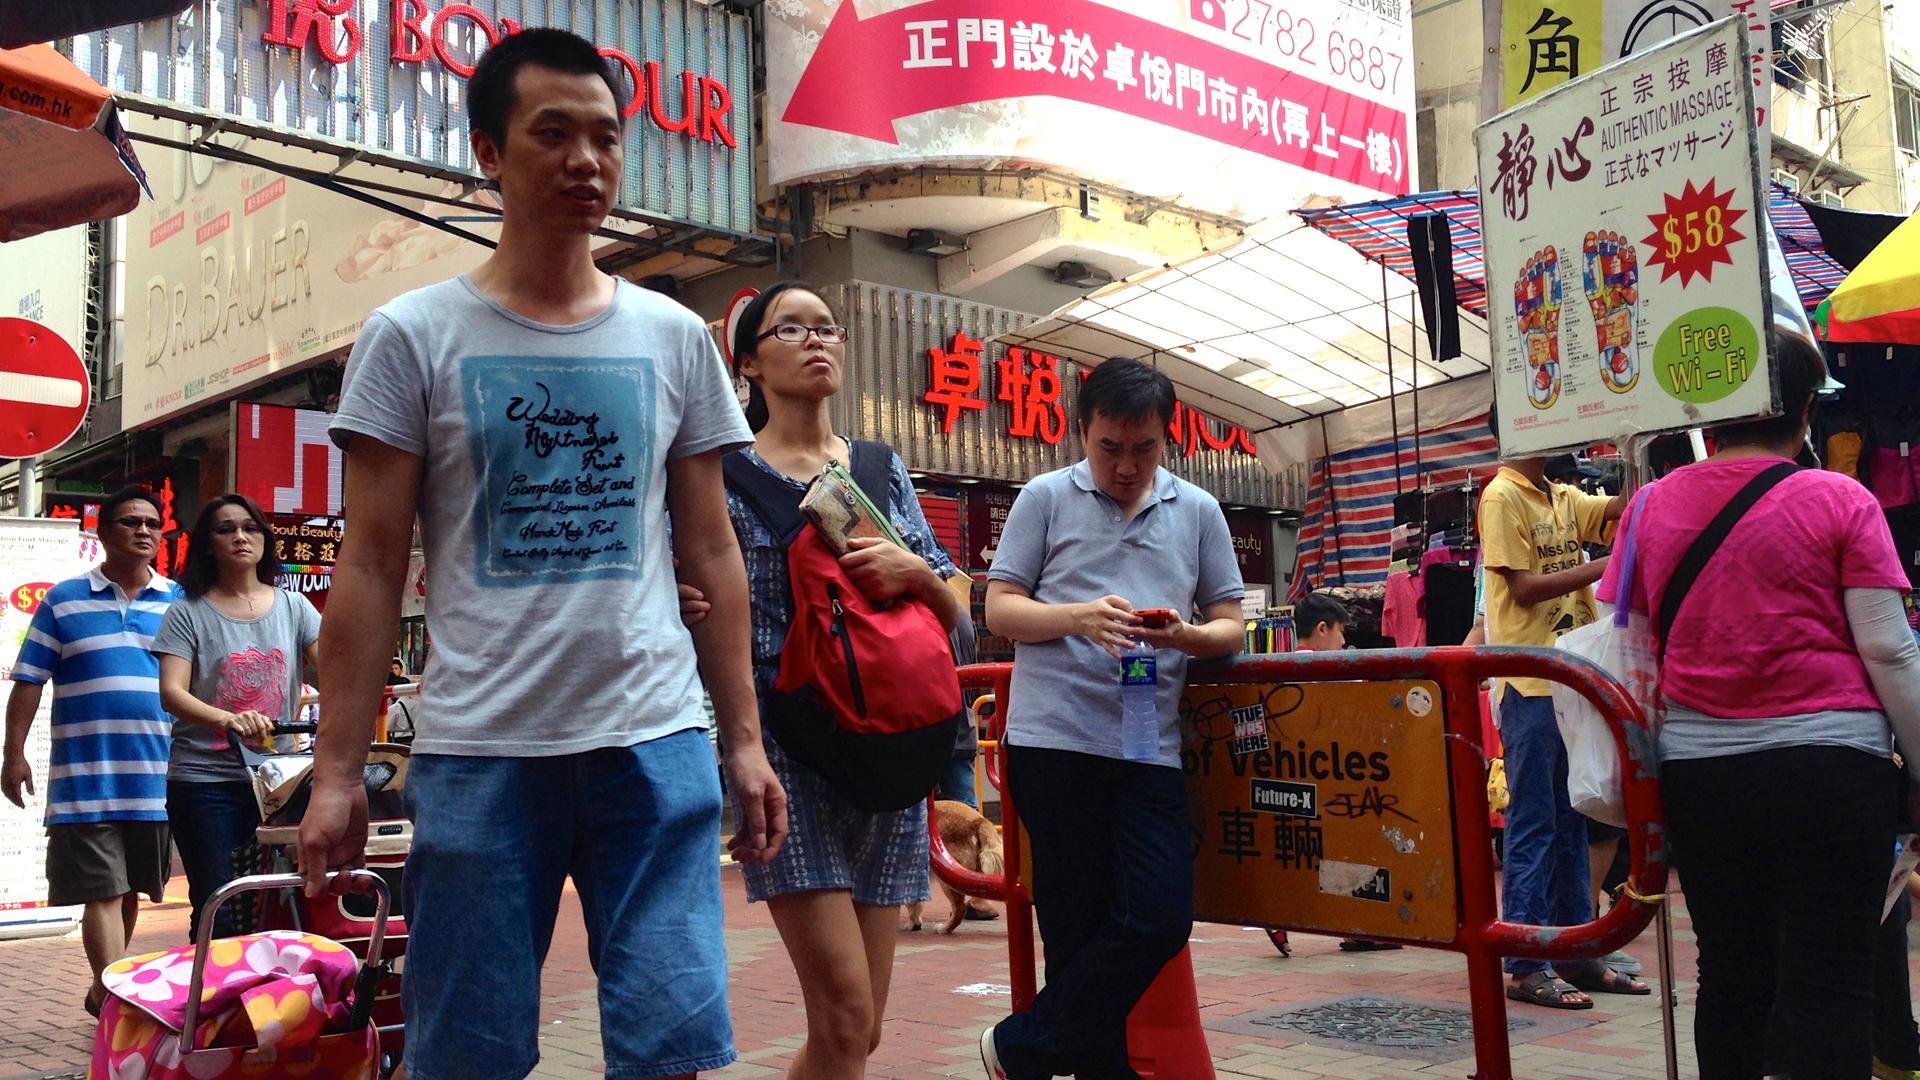 Chinese shoppers come to Hong Kong with empty suitcases, looking for bargains to bring back home.